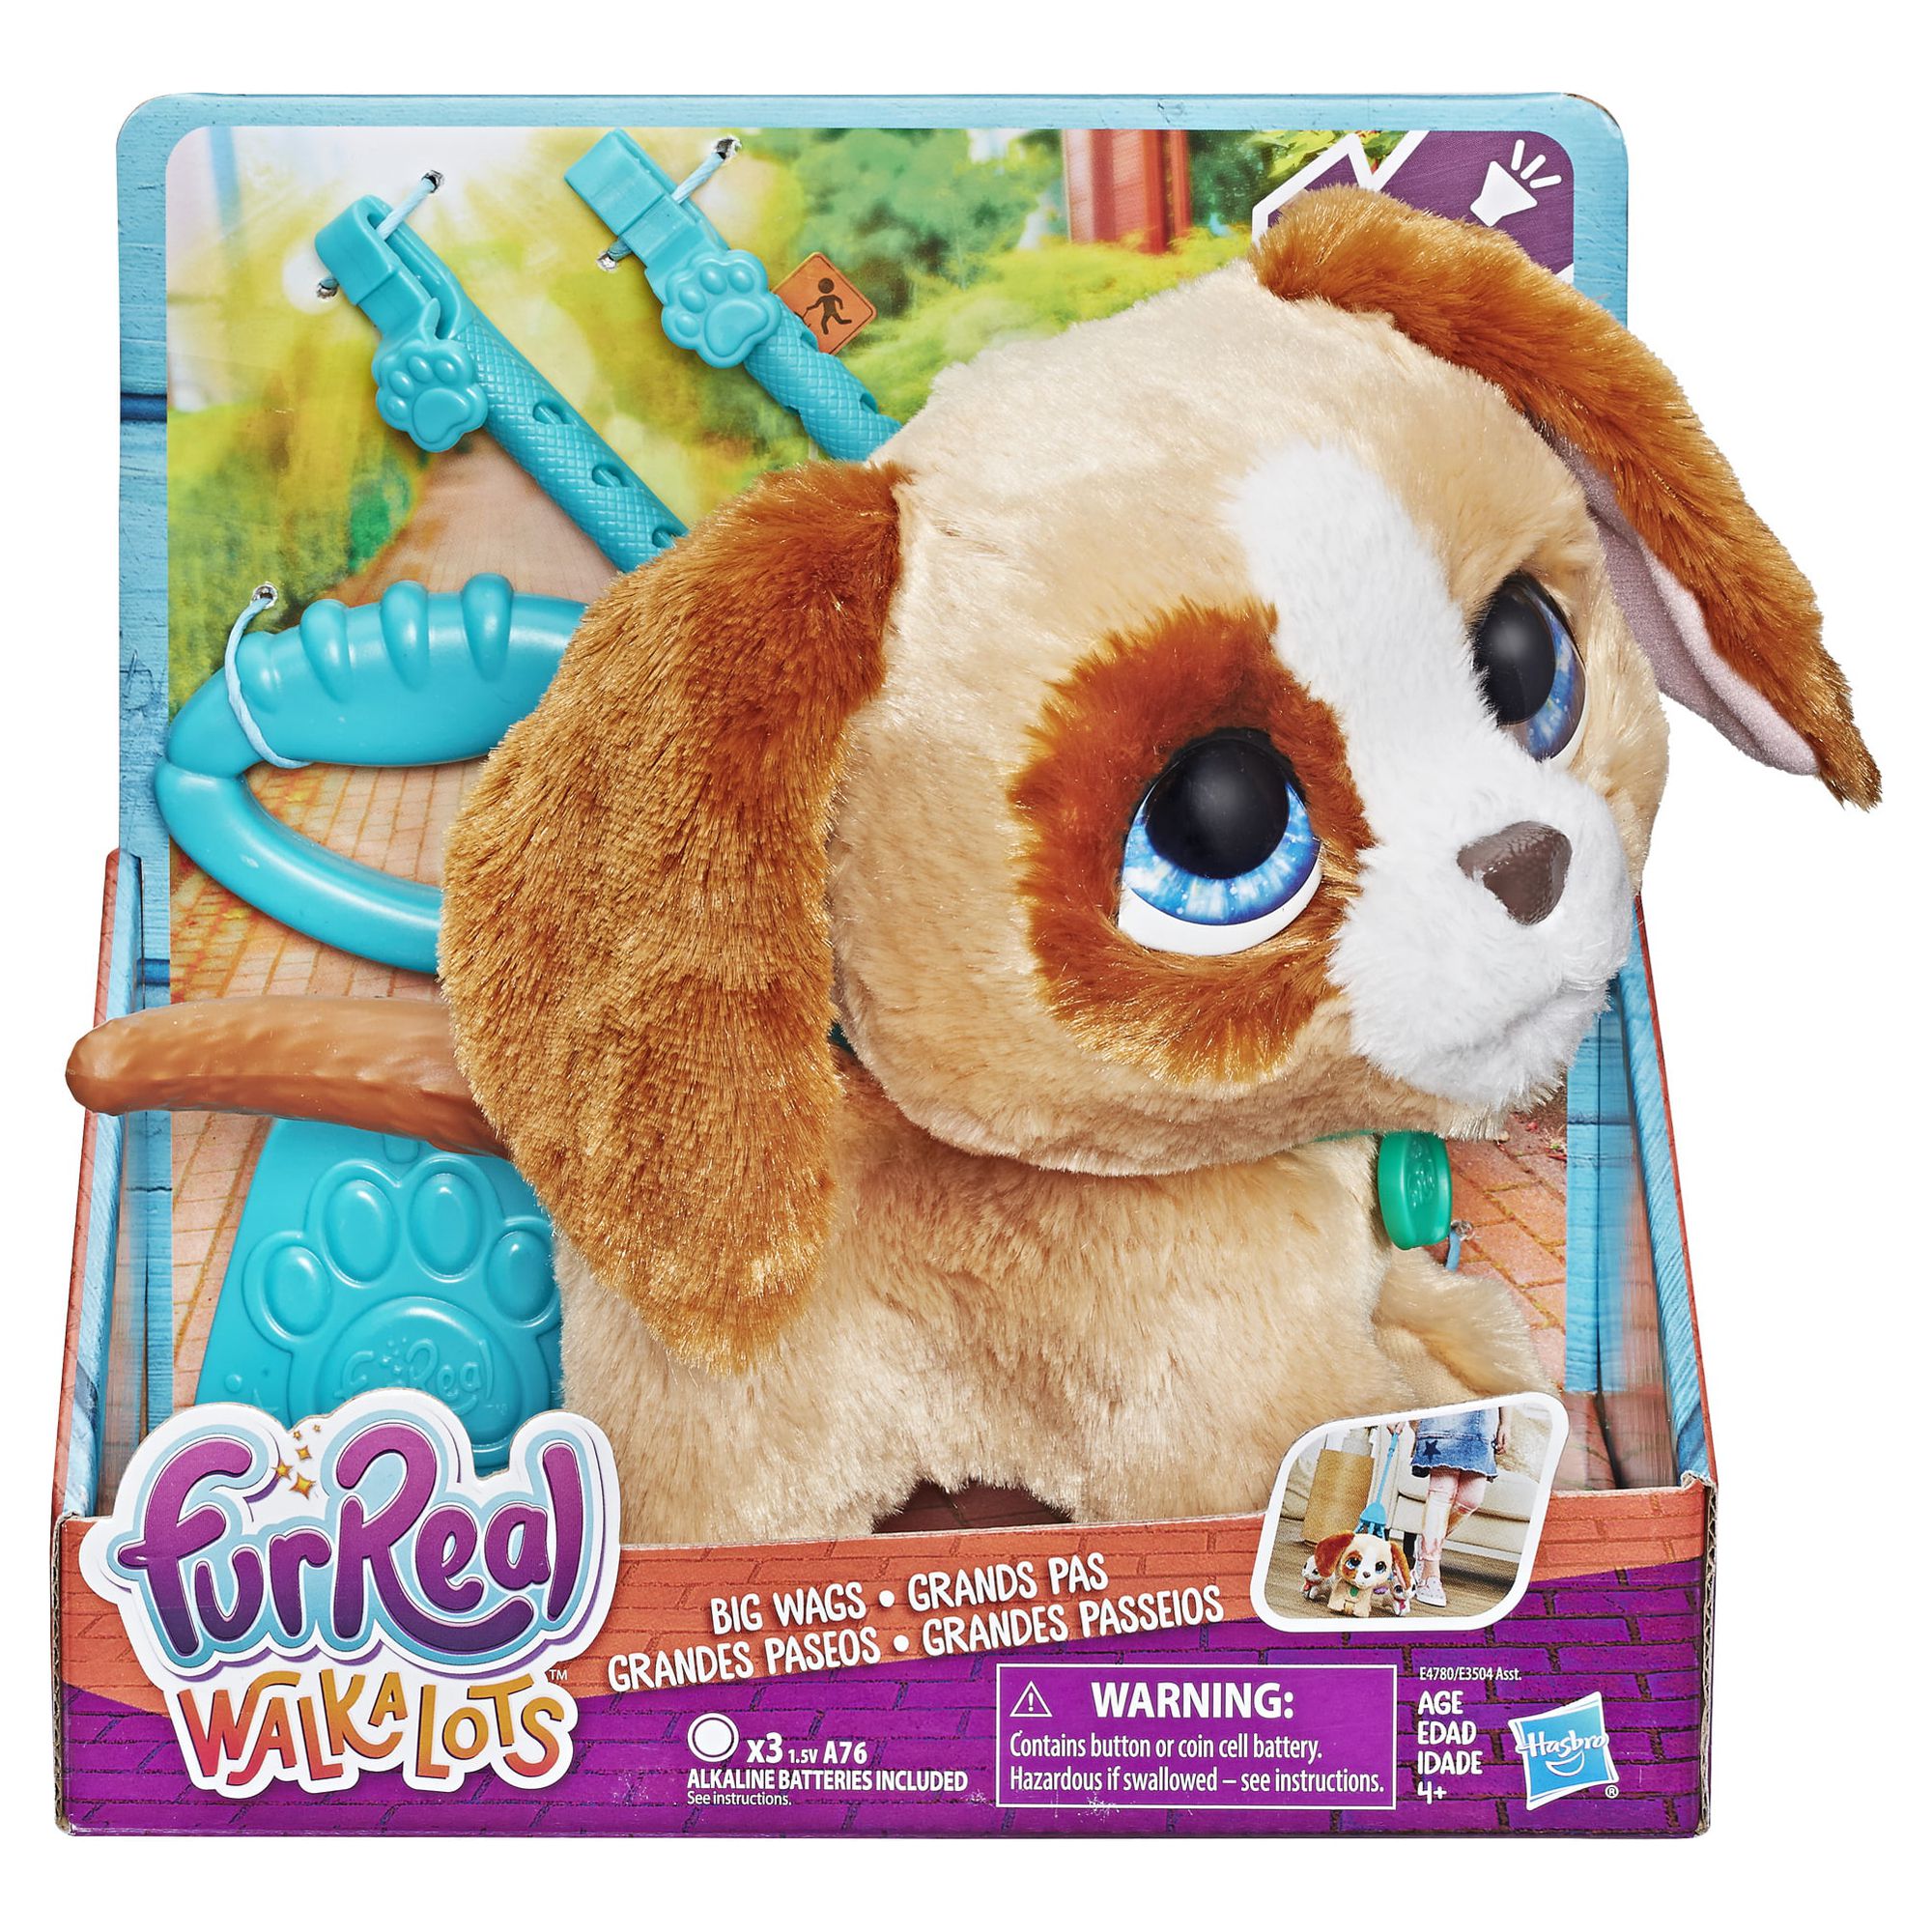 FurReal Walkalots Interactive Electronic Pet Big Wags Unicorn Kids Toy for Boys and Girls - image 5 of 6